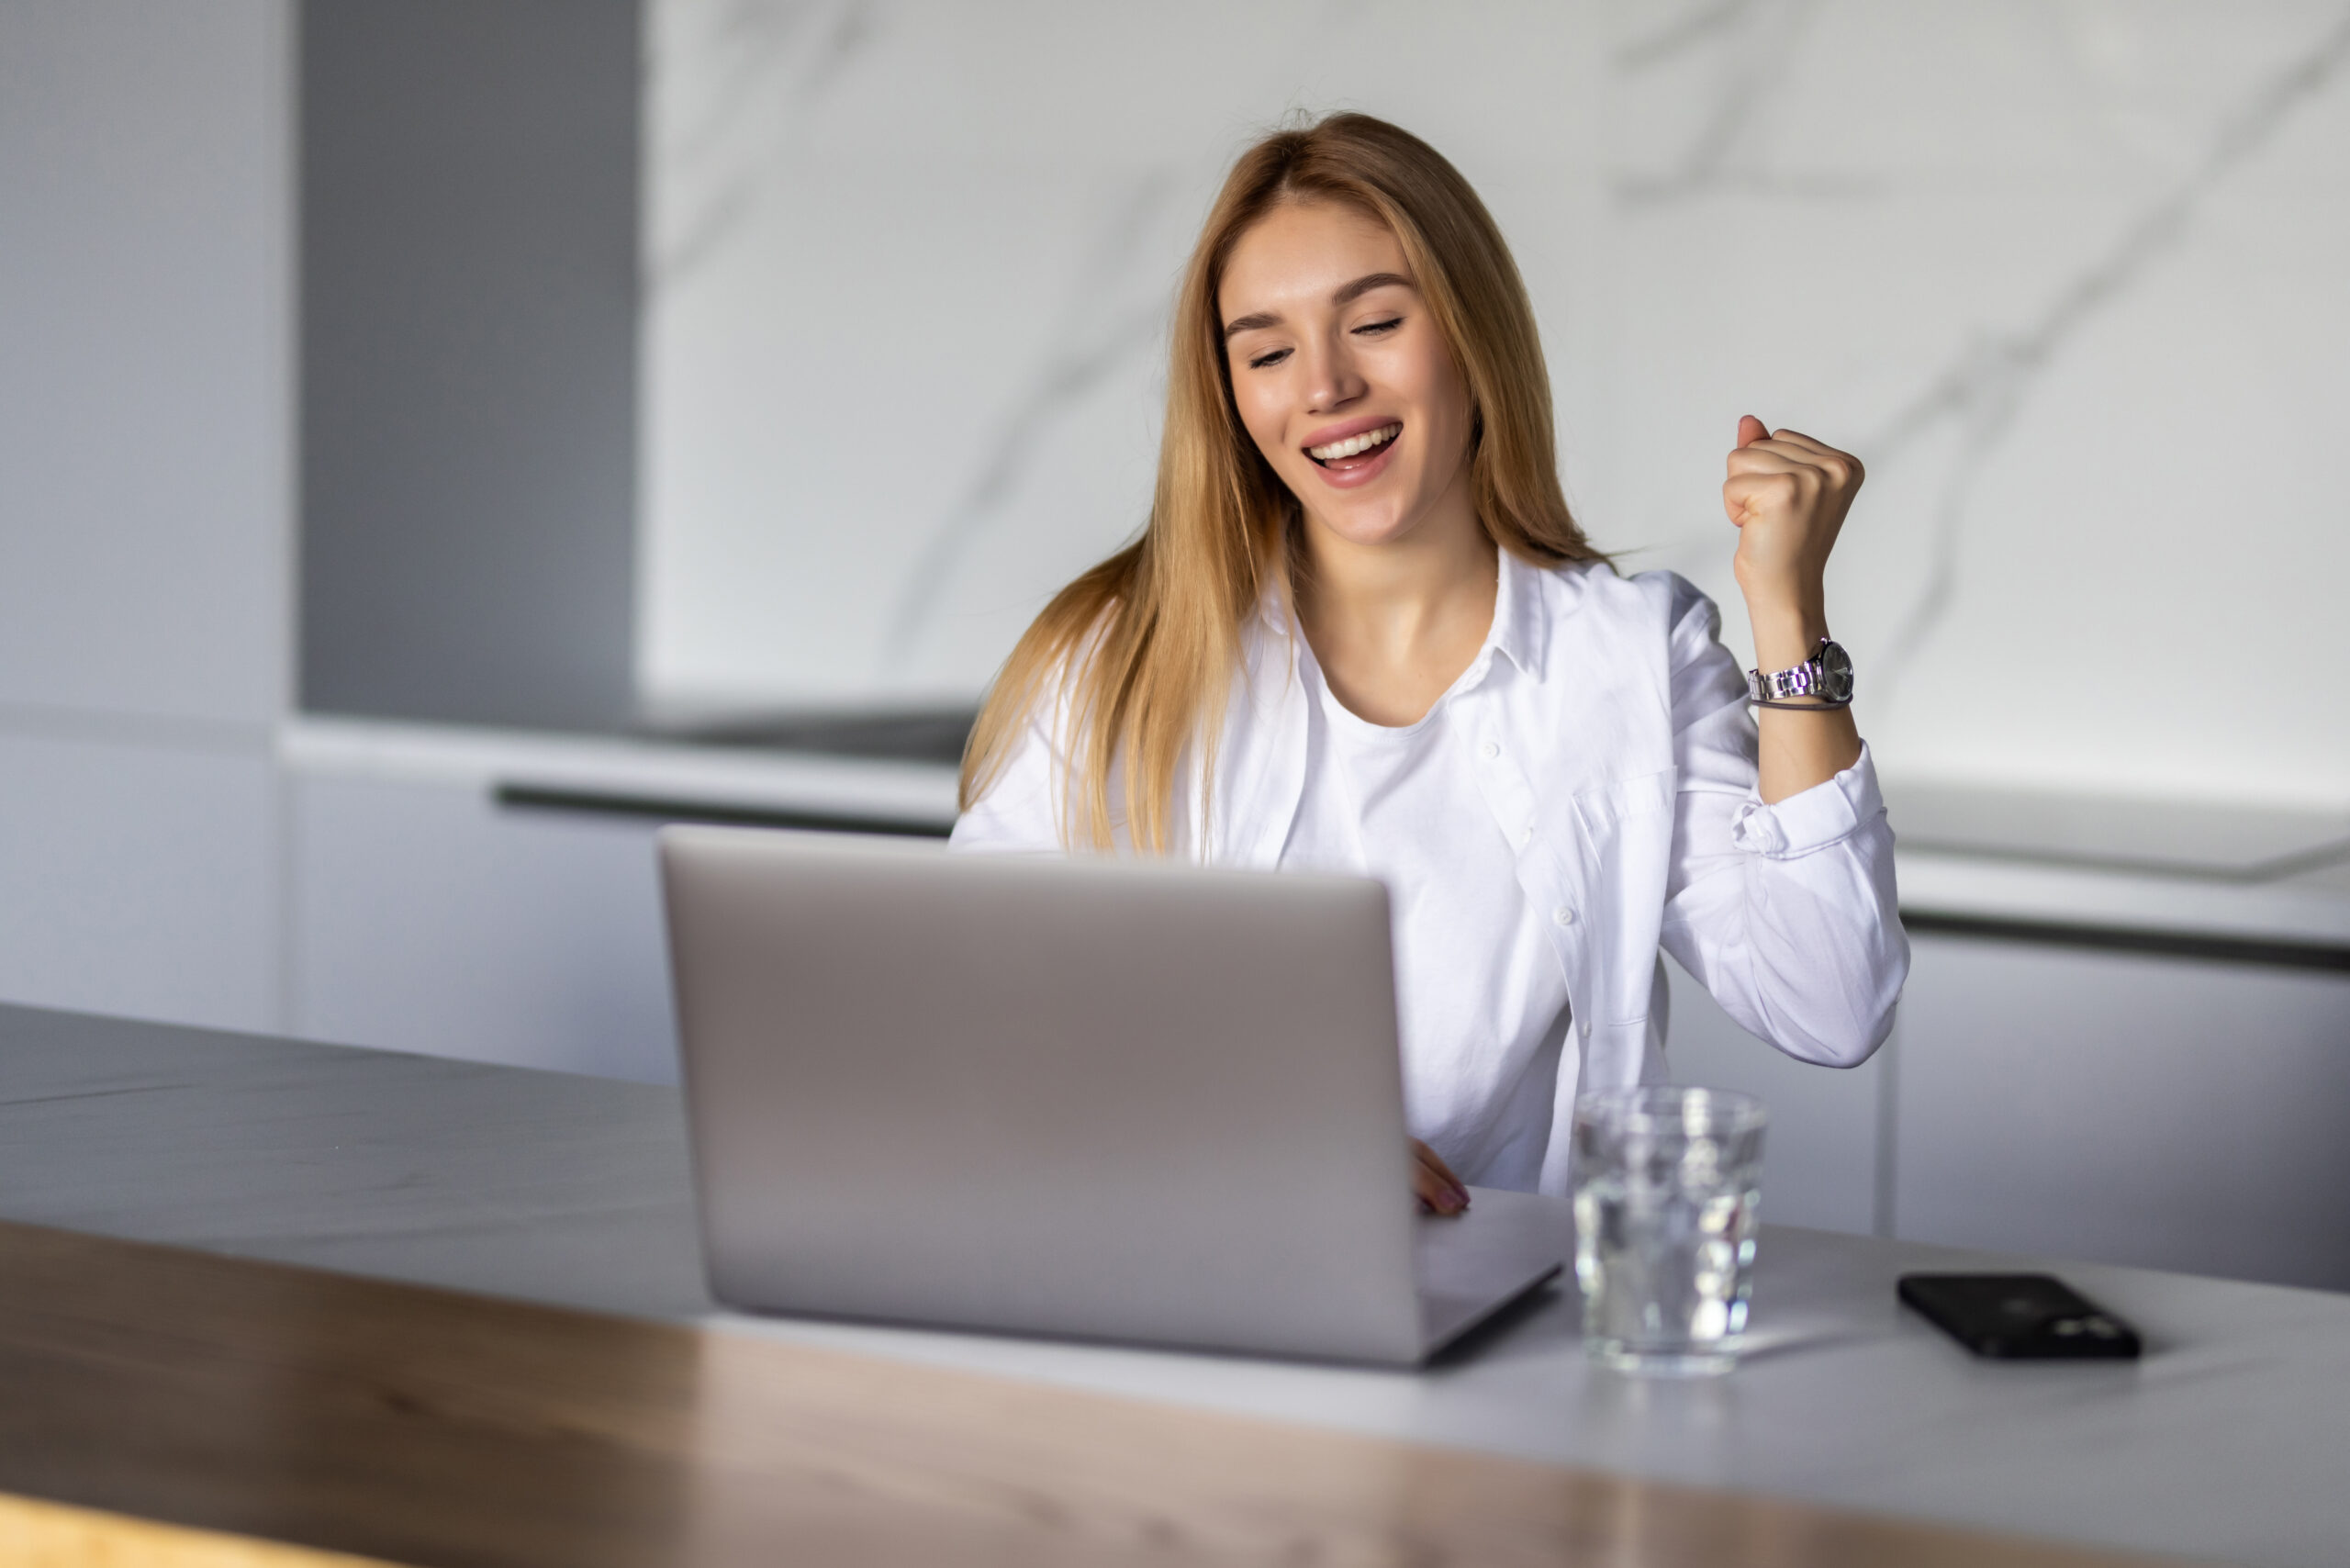 smiling woman with laptop looking excited about something